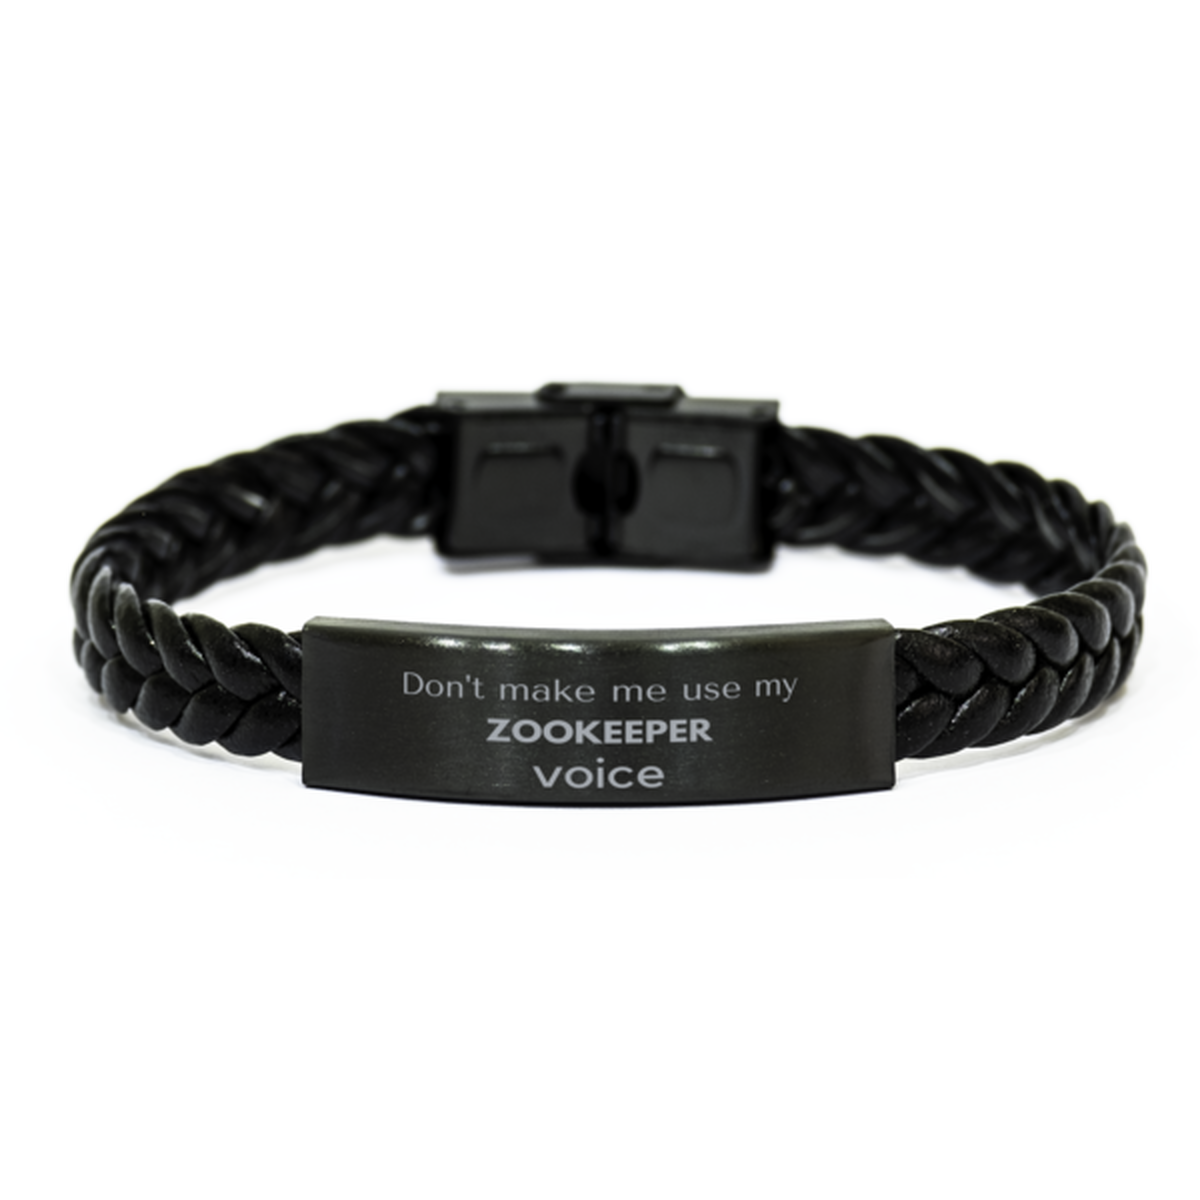 Don't make me use my Zookeeper voice, Sarcasm Zookeeper Gifts, Christmas Zookeeper Braided Leather Bracelet Birthday Unique Gifts For Zookeeper Coworkers, Men, Women, Colleague, Friends